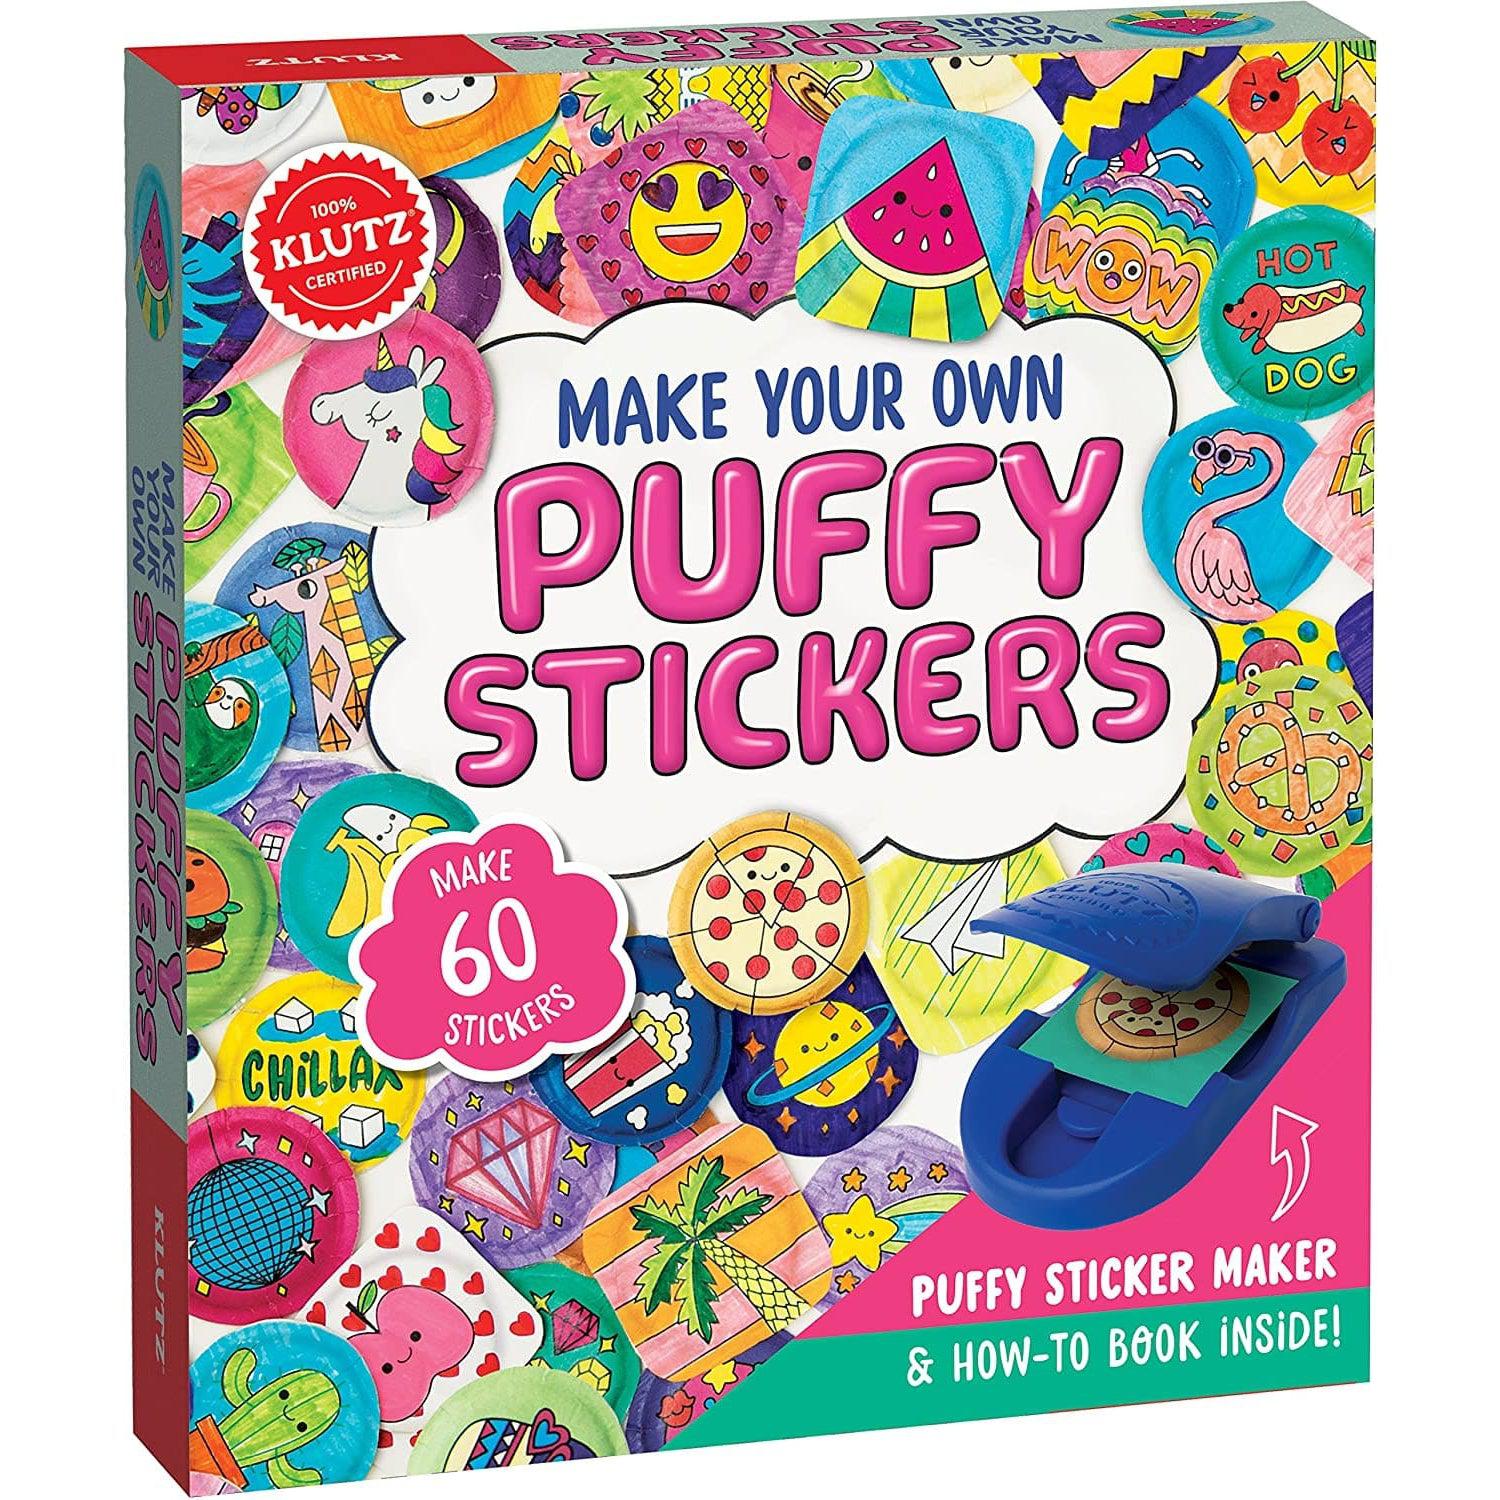 Klutz-Make Your Own Puffy Stickers-9781338210194-Legacy Toys